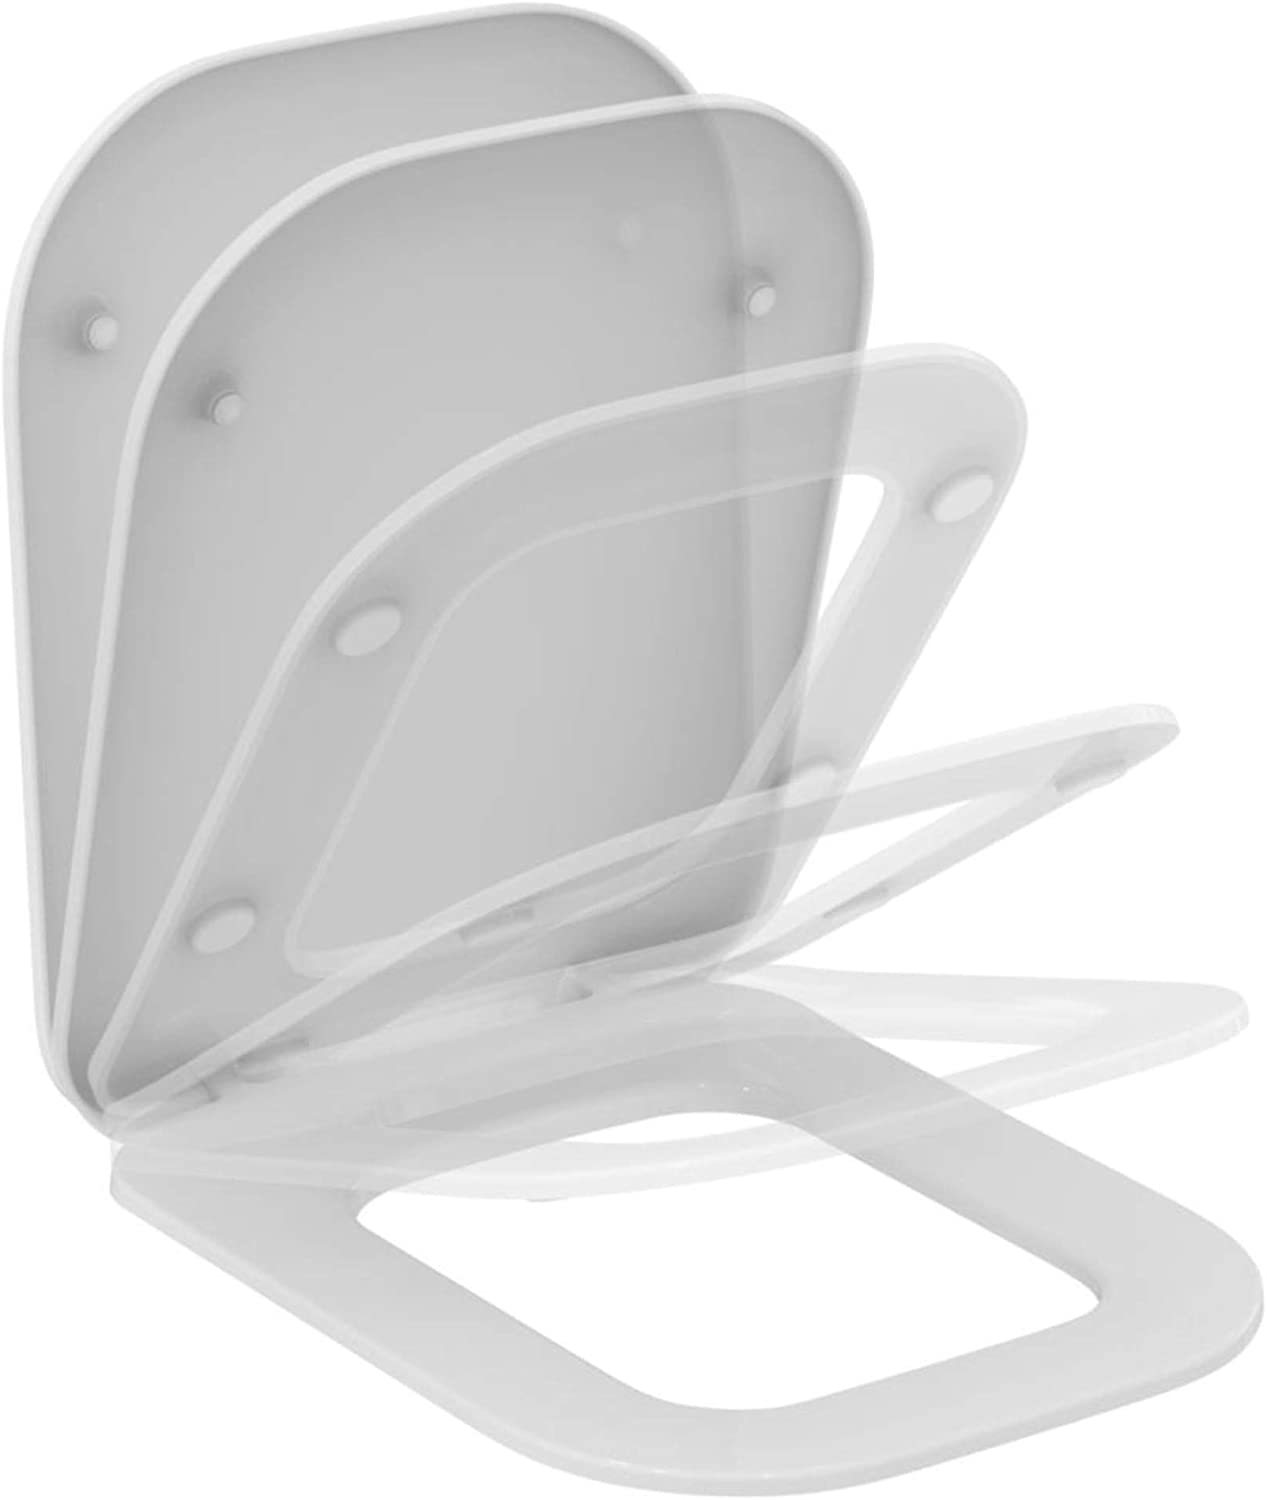 IDEAL STANDARD Tonic II toilet seat with cover and soft closing K706501 white resmi